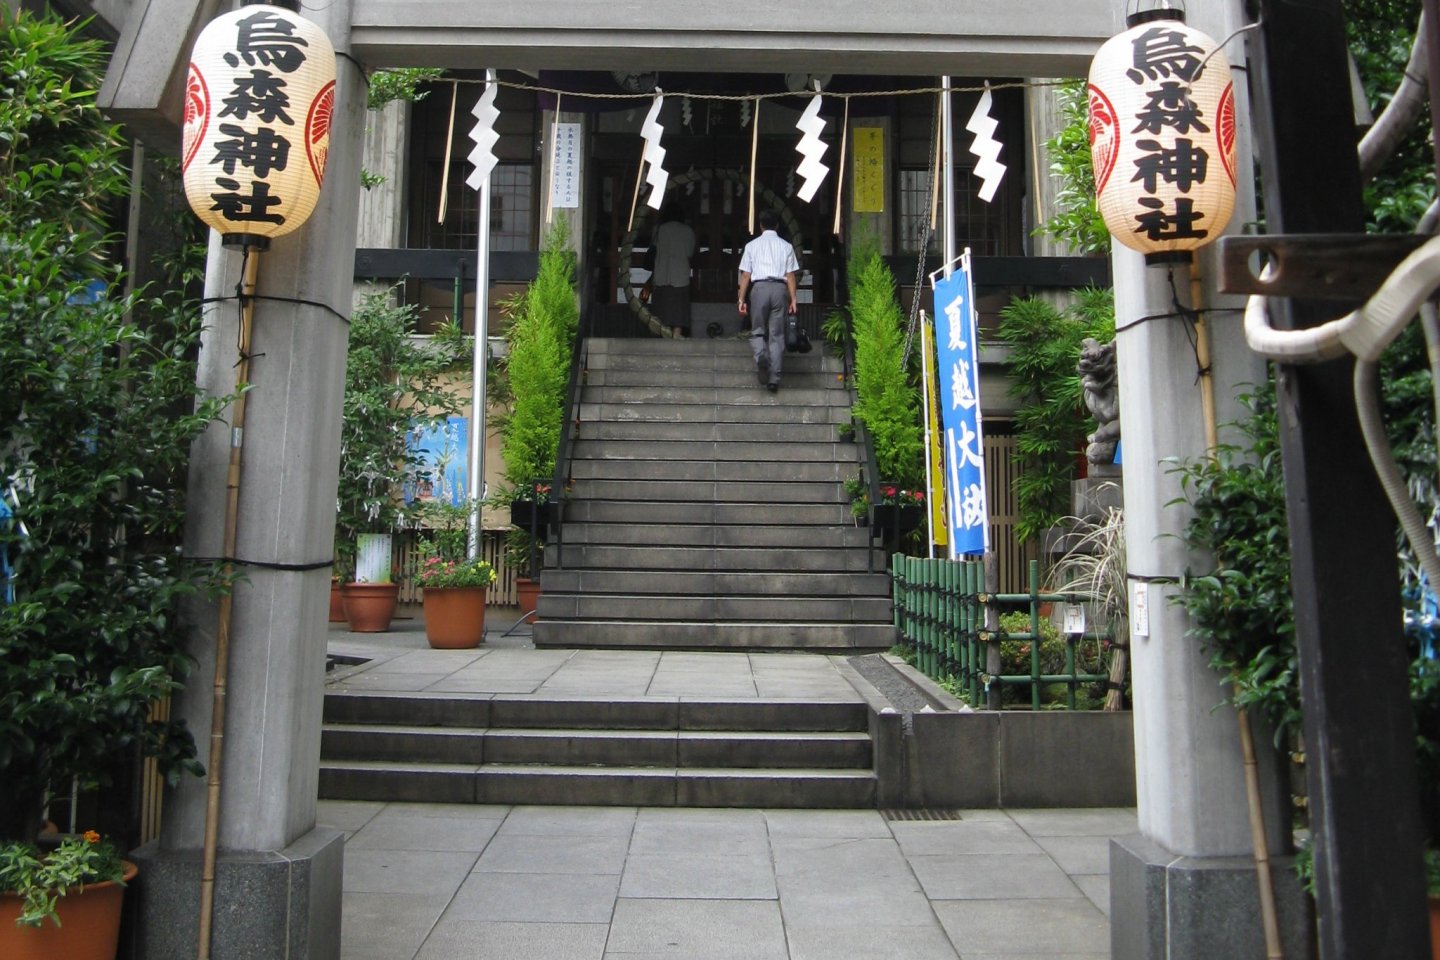 Landscaped for effect, the entrance to Karasumori Shrine is located very close to Simbashi Station.